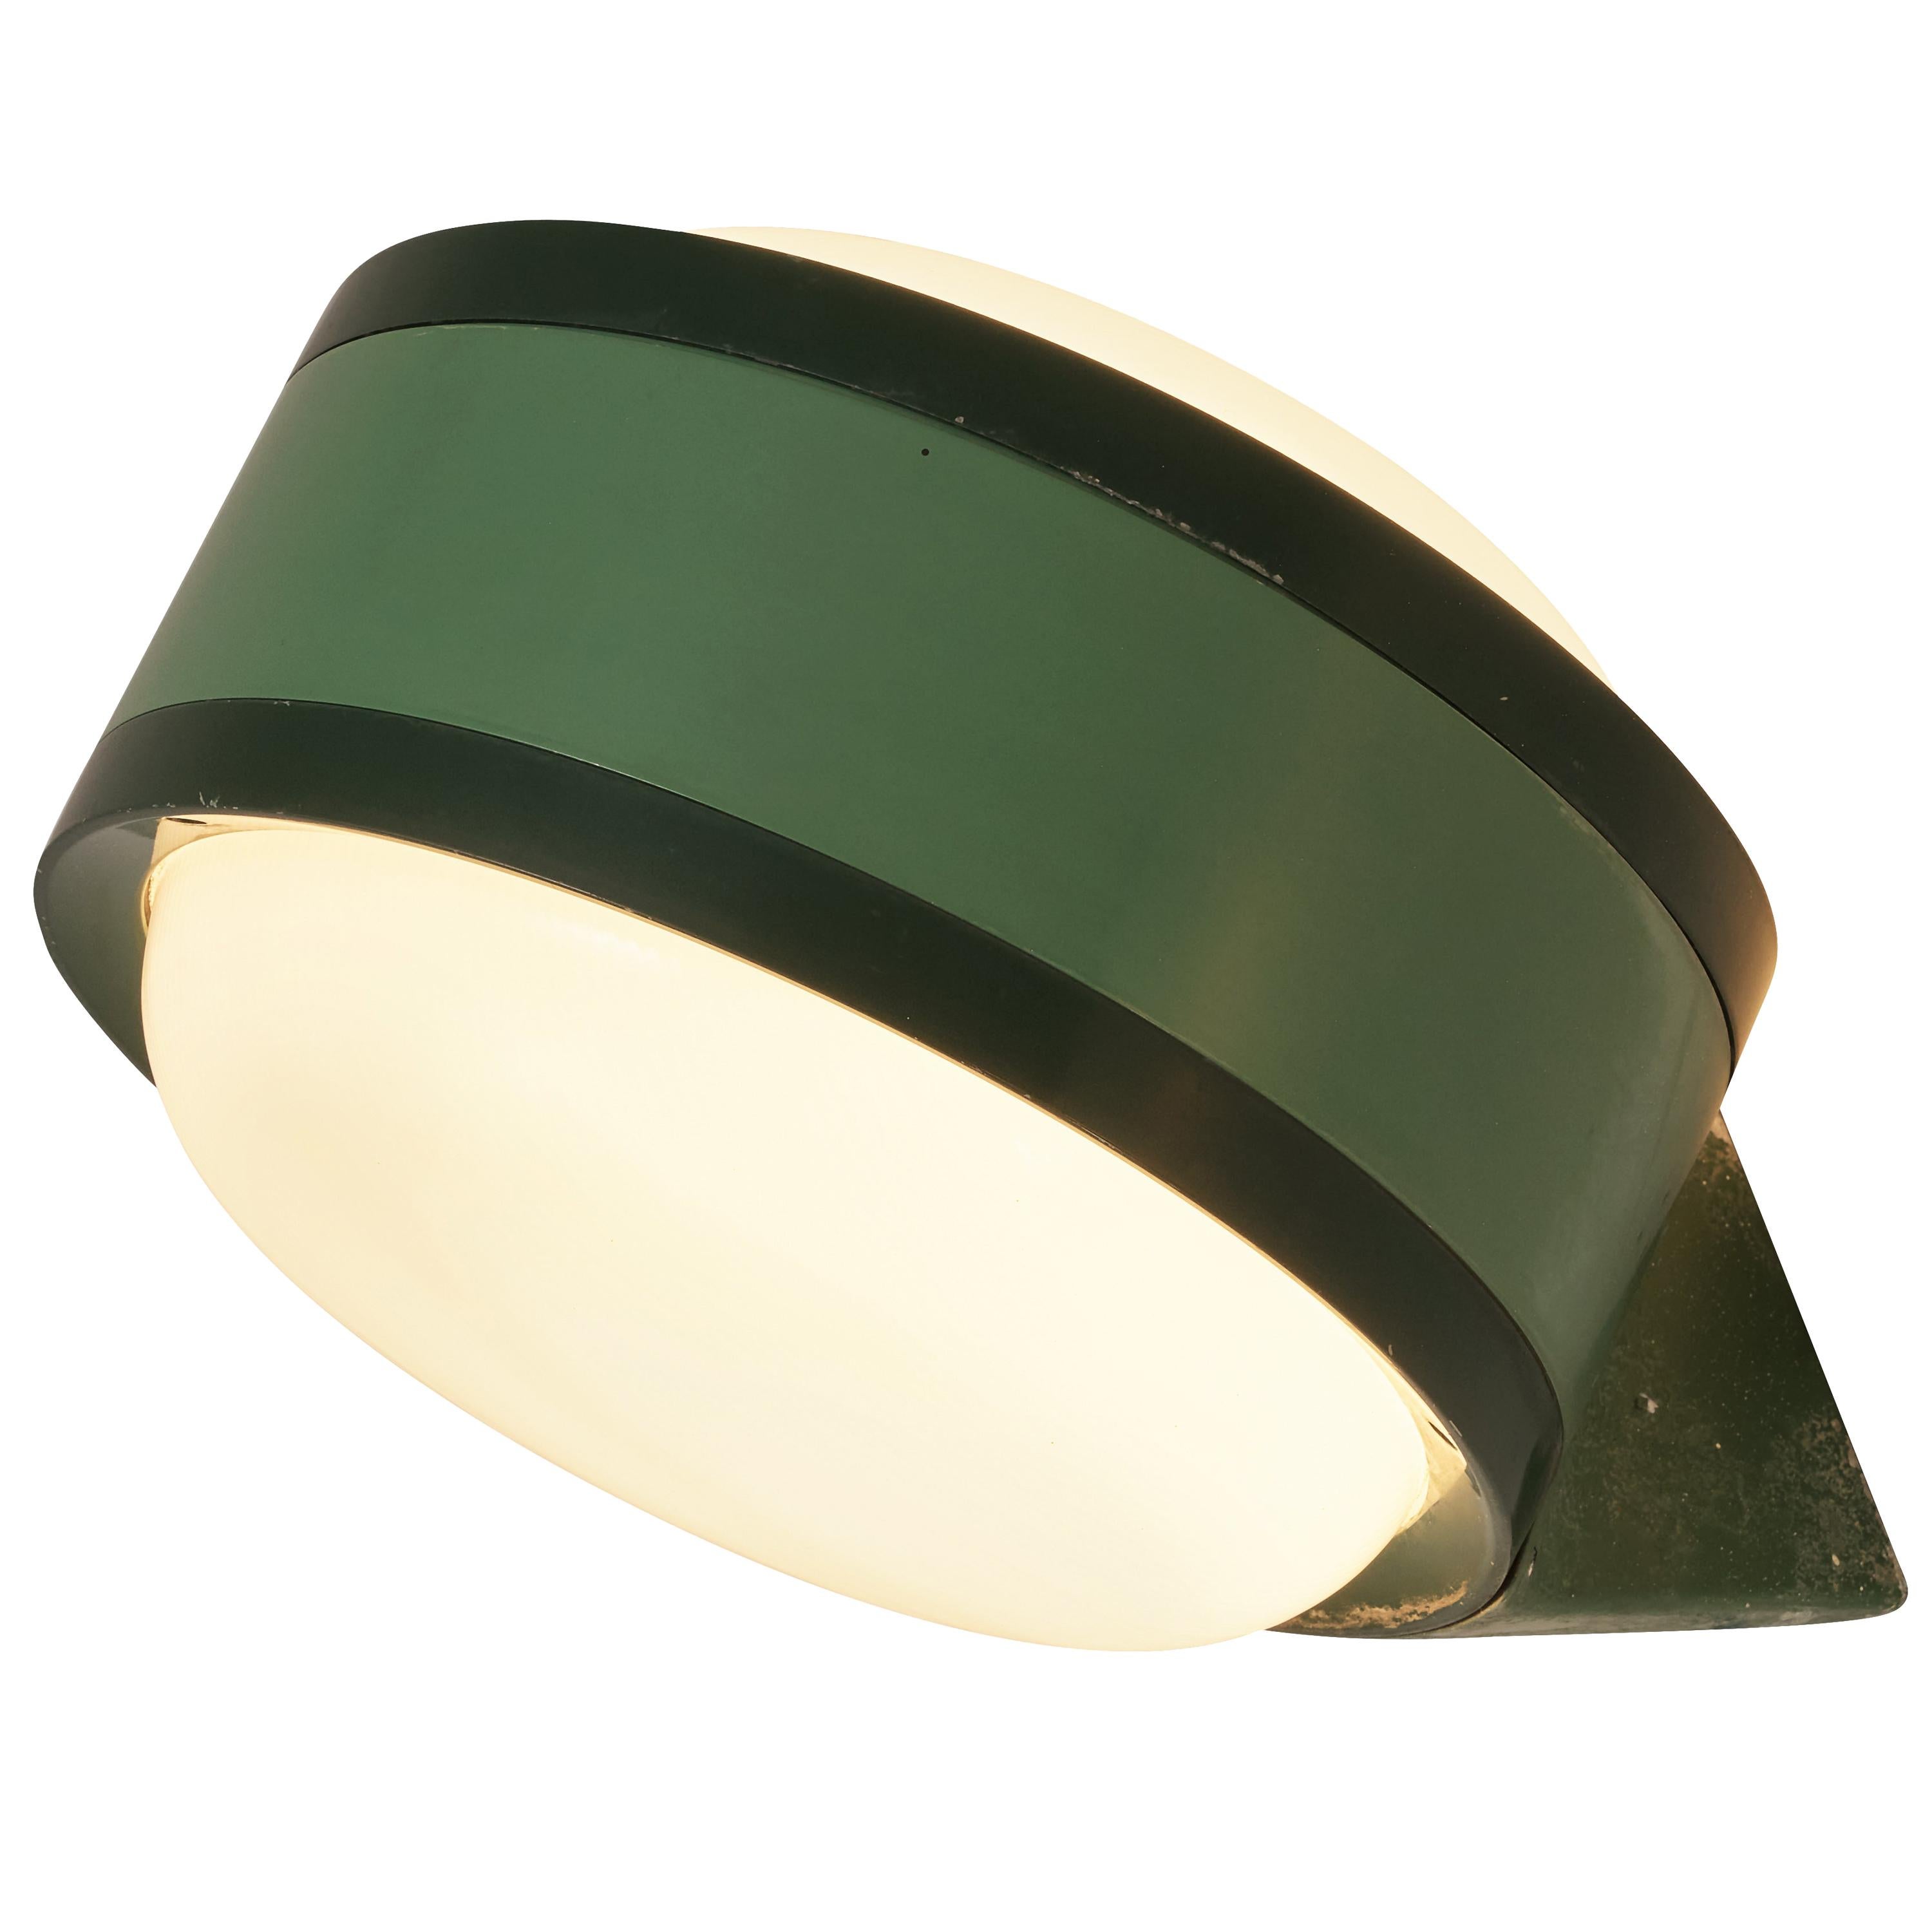 Tobia Scarpa for Flos ‘Tamburo’ Wall Lights in Green Aluminum and Glass